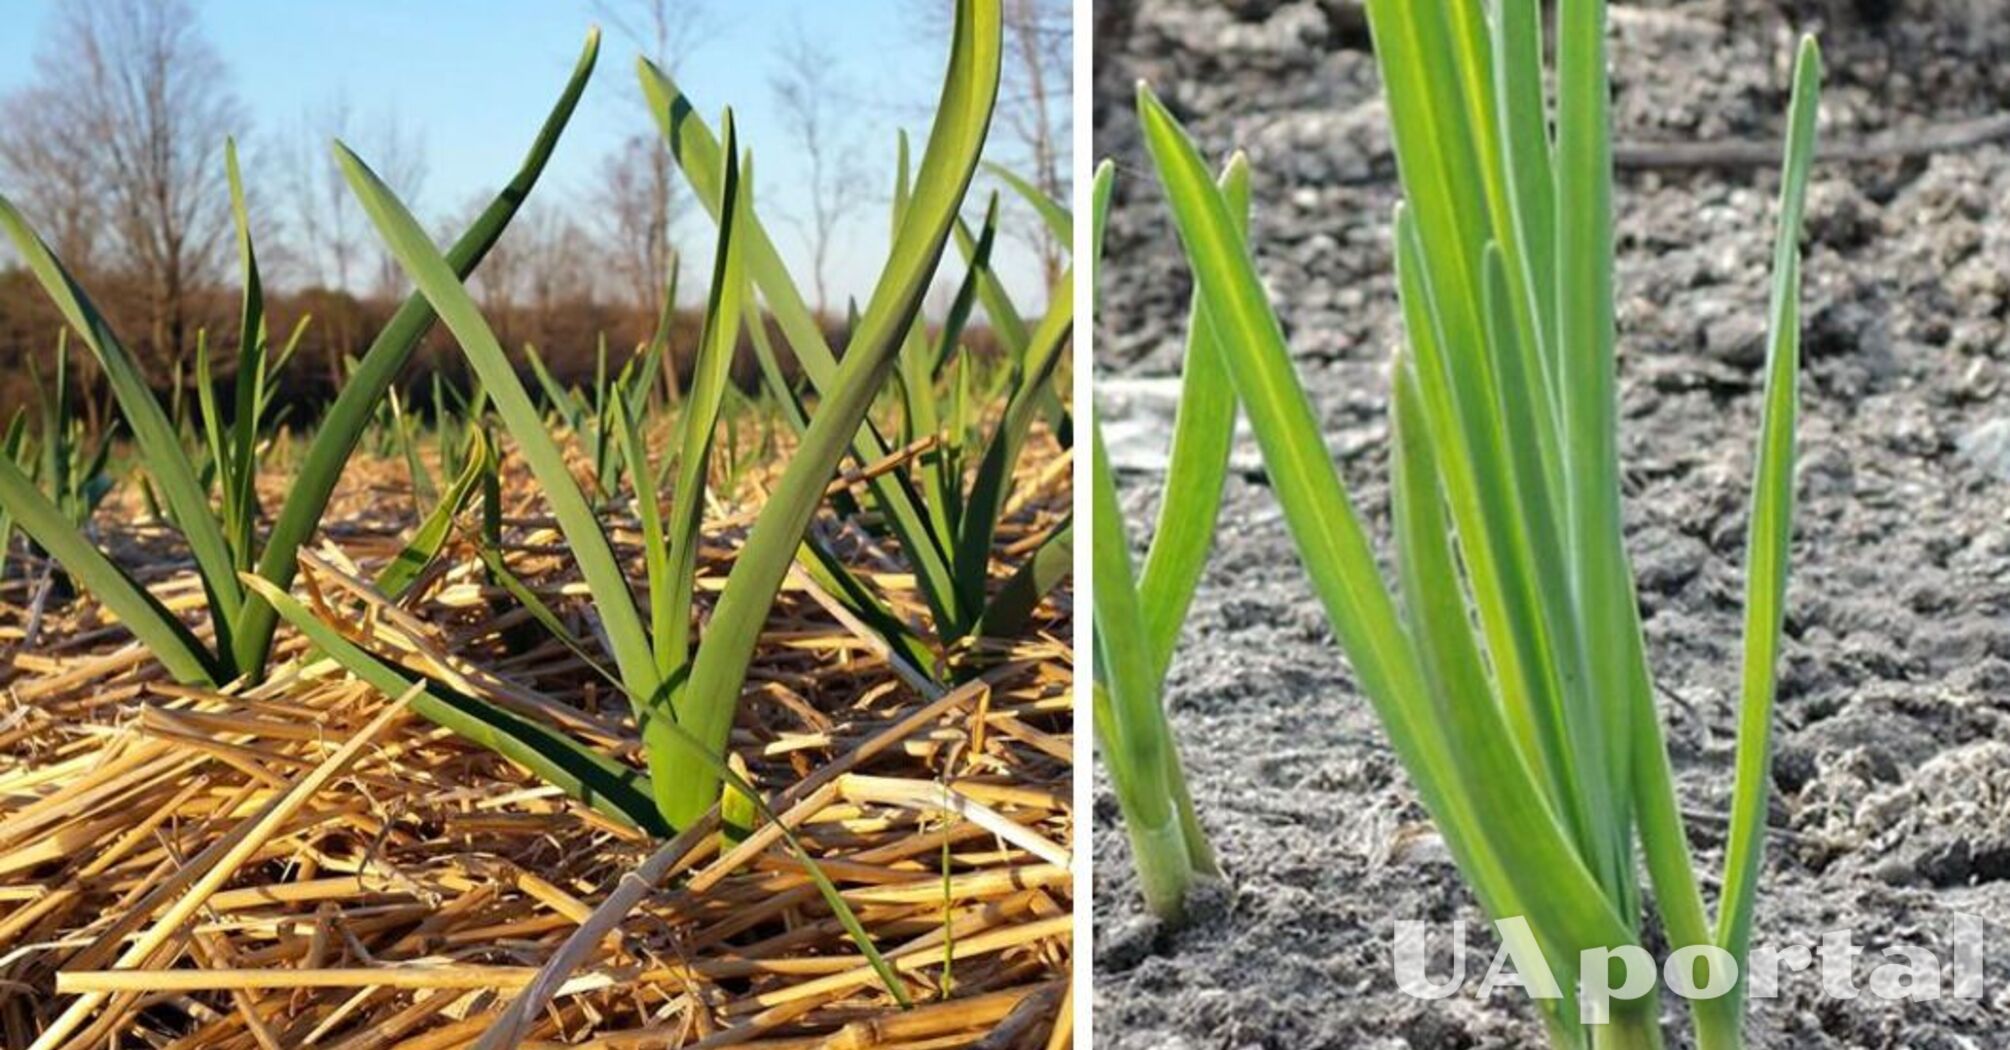 Winter garlic sprouted before frost: gardeners shared what to do